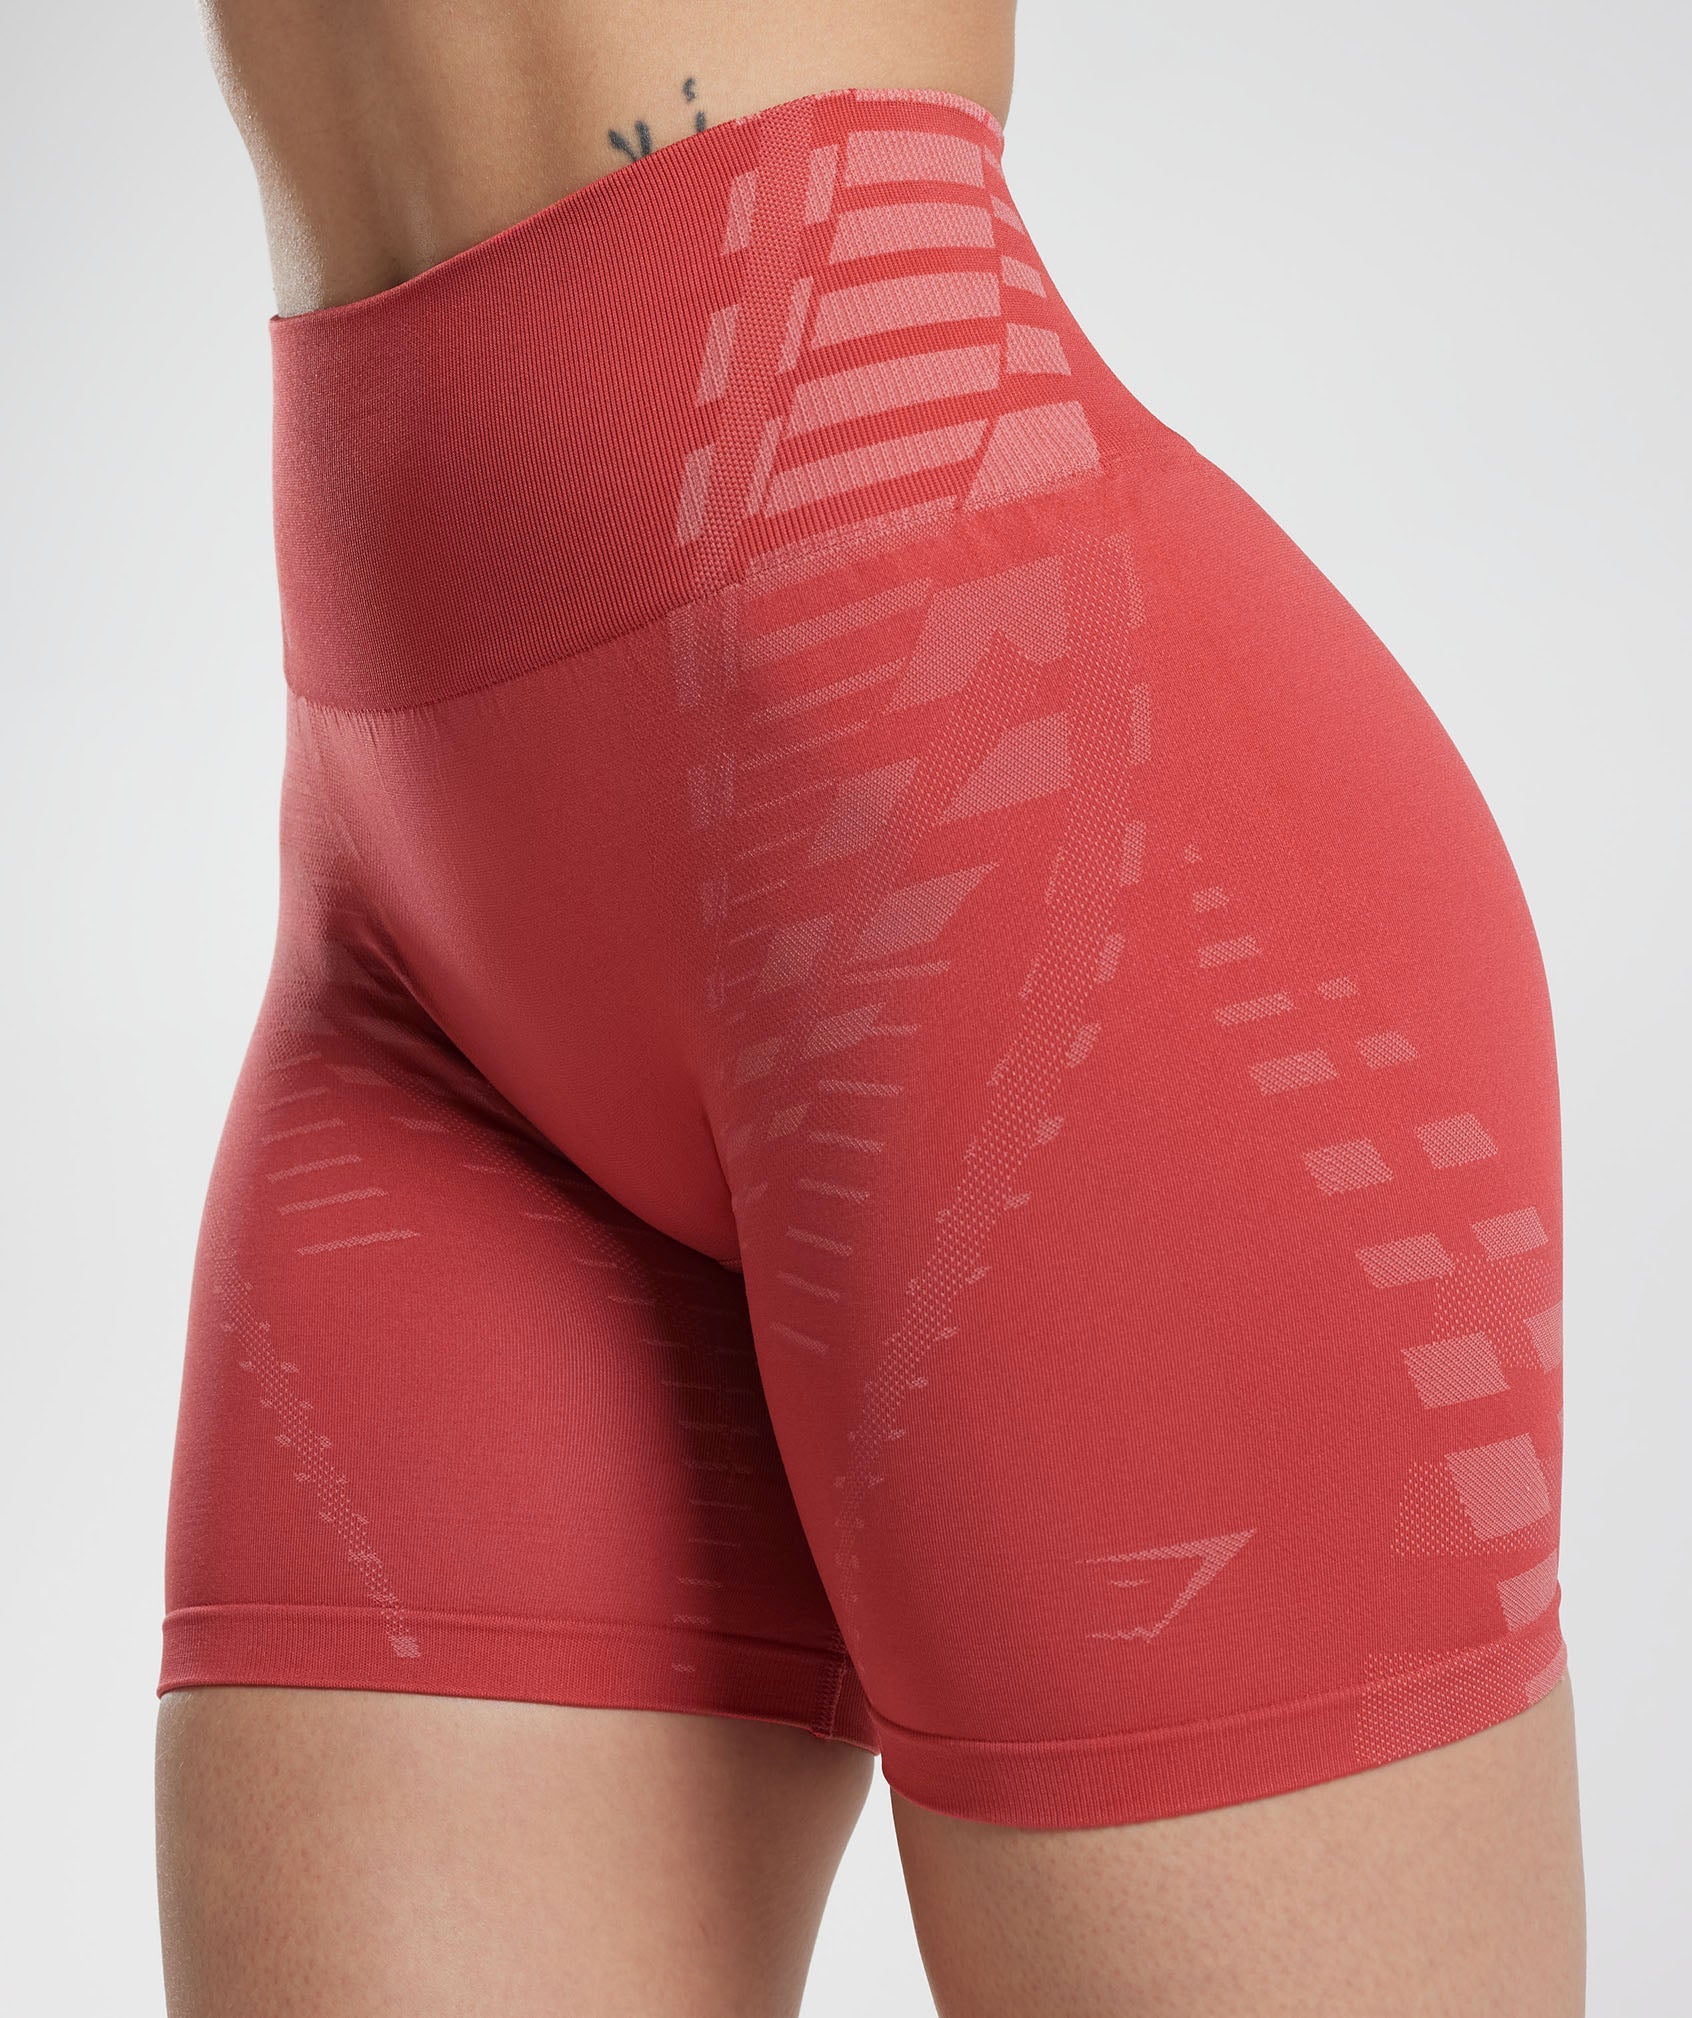 Apex Limit Shorts in Sundried Red/Terracotta Pink - view 6